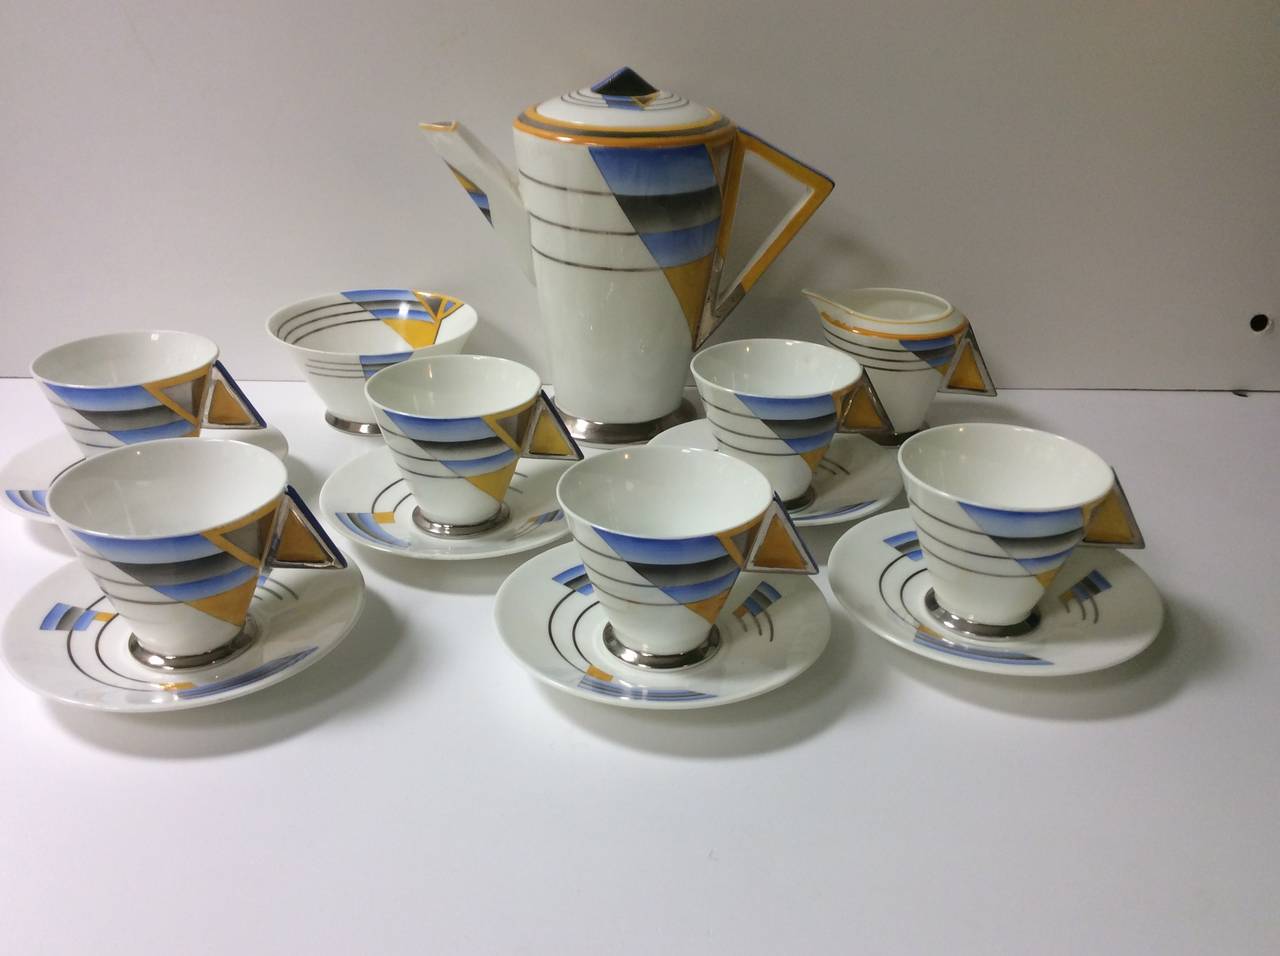 A Rare Shelley Coffee Service for six on the Art Deco Mode Shape designed by Eric Slater, with the Stunning Shades and Lines pattern # 11760.